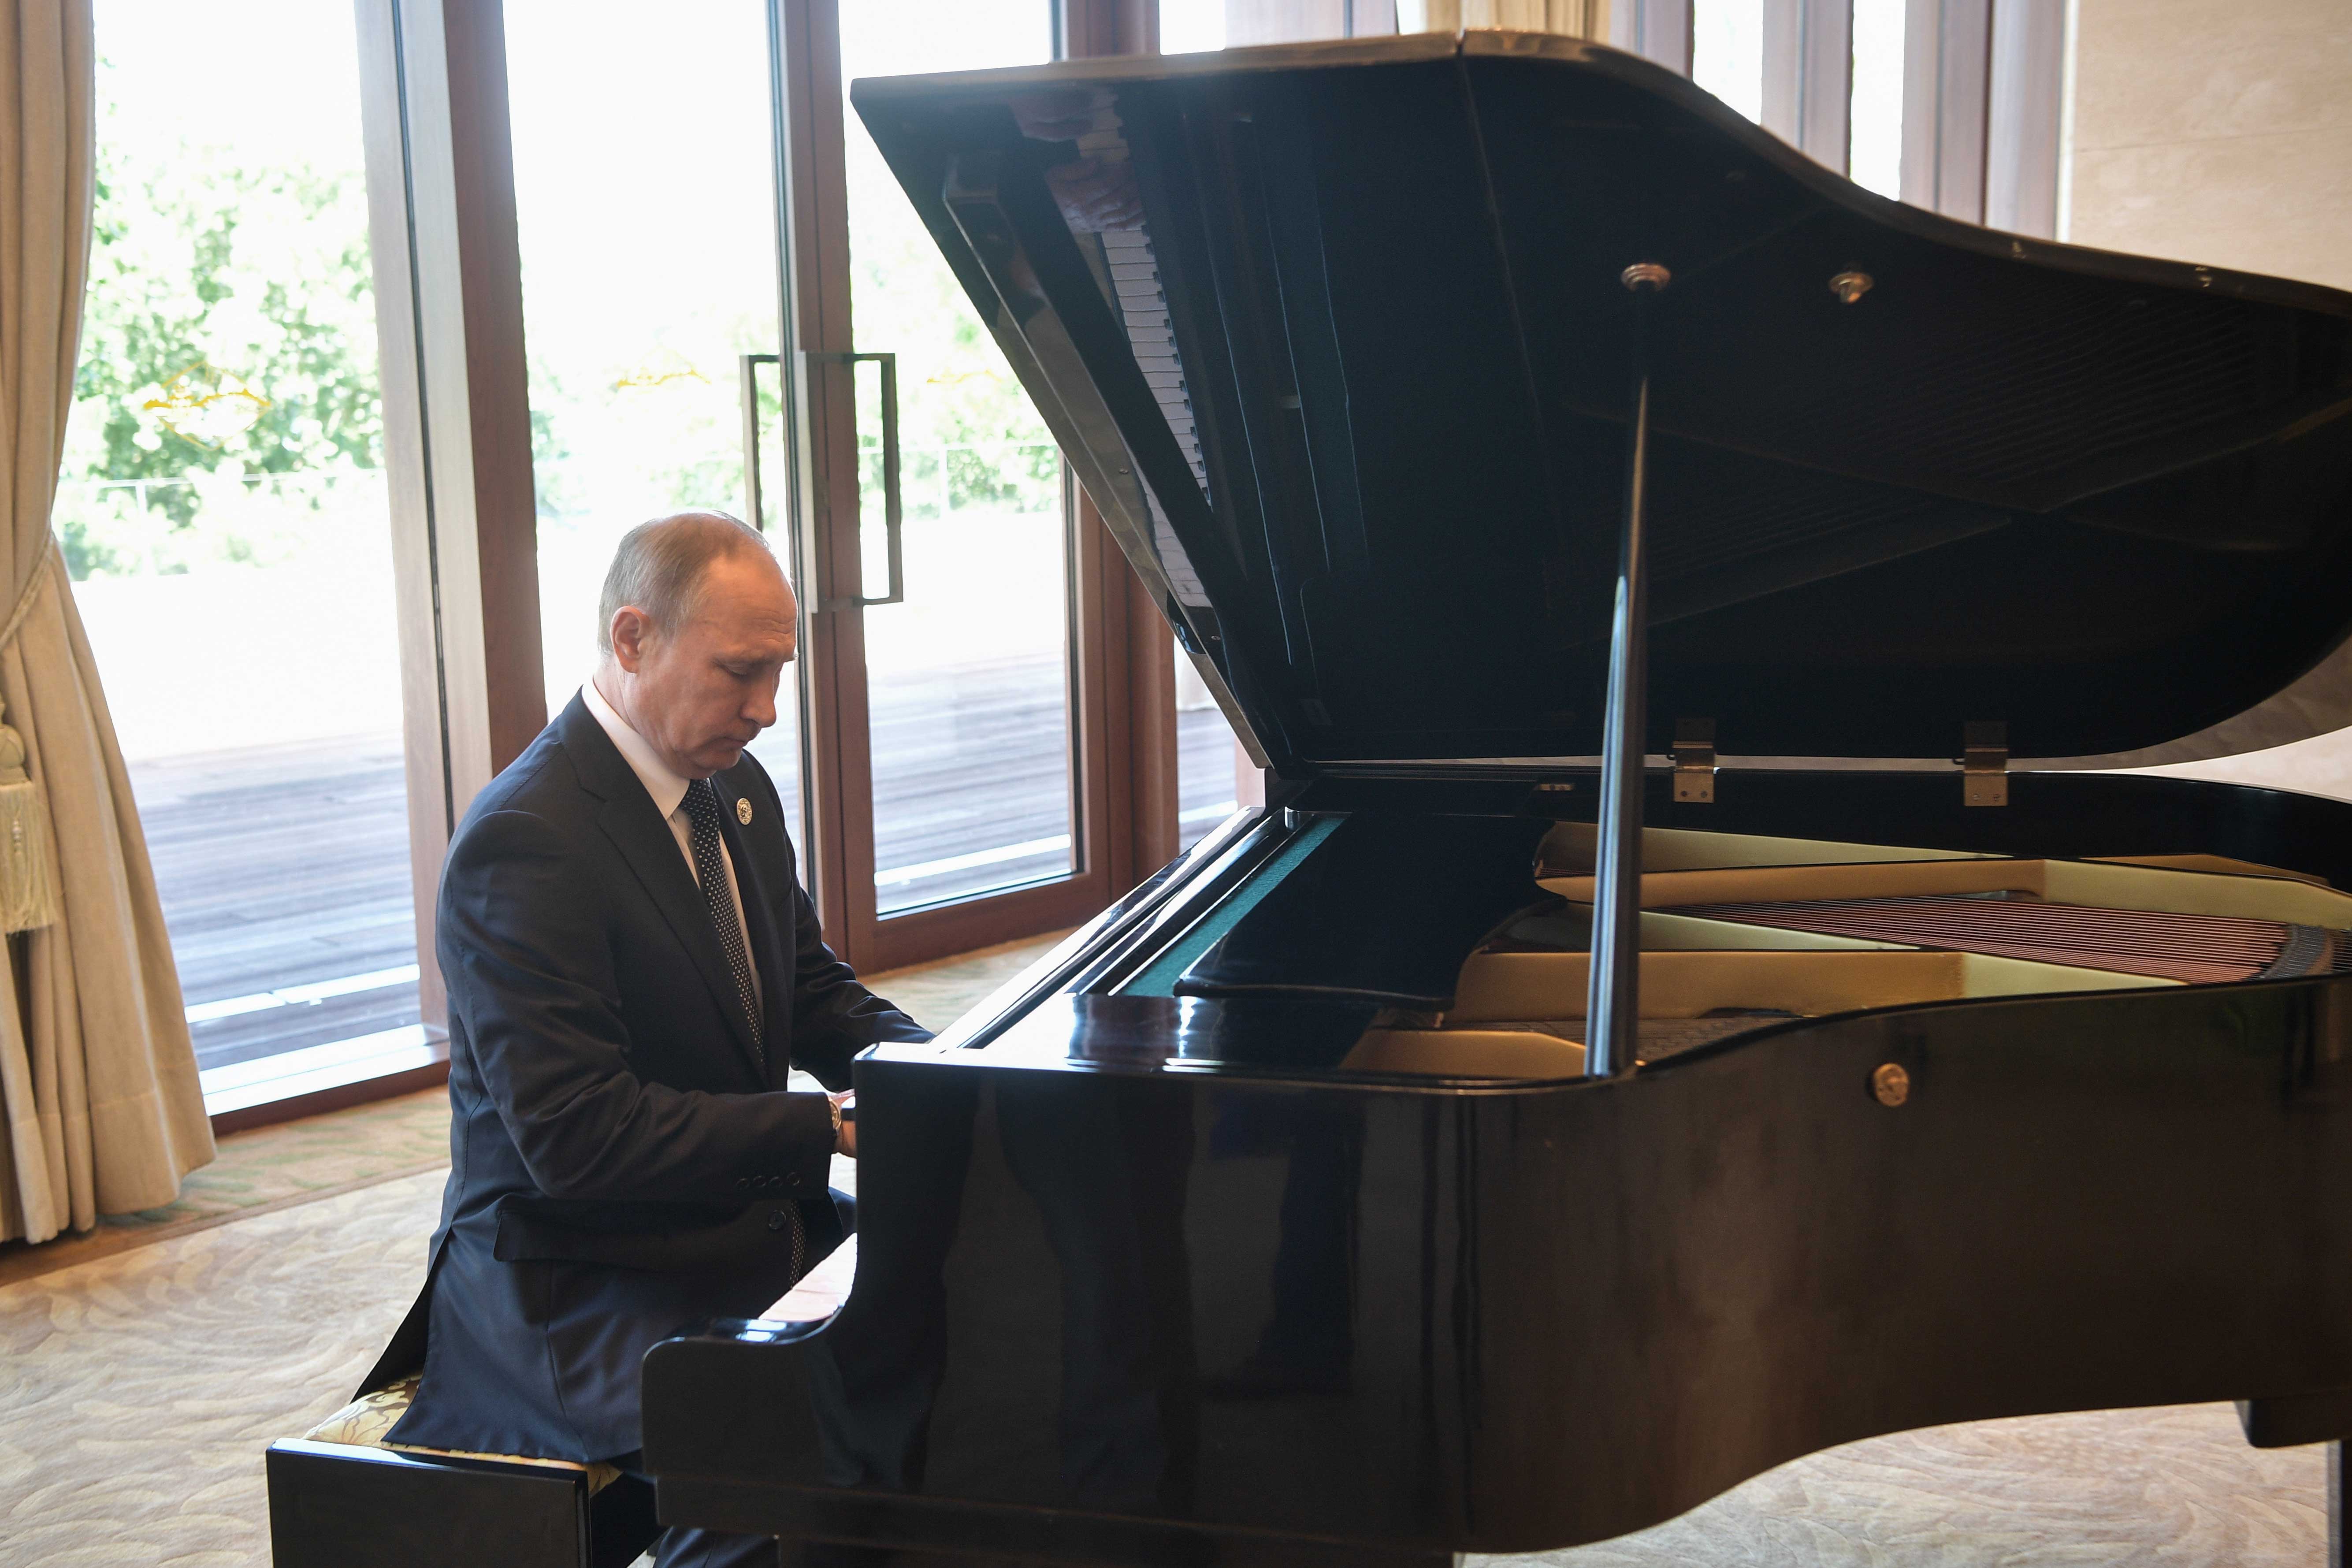 Russian President Vladimir Putin plays the grand piano ahead of a meeting with China's President Xi Jinping at the Diaoyutai State Guesthouse in Beijing, China.
